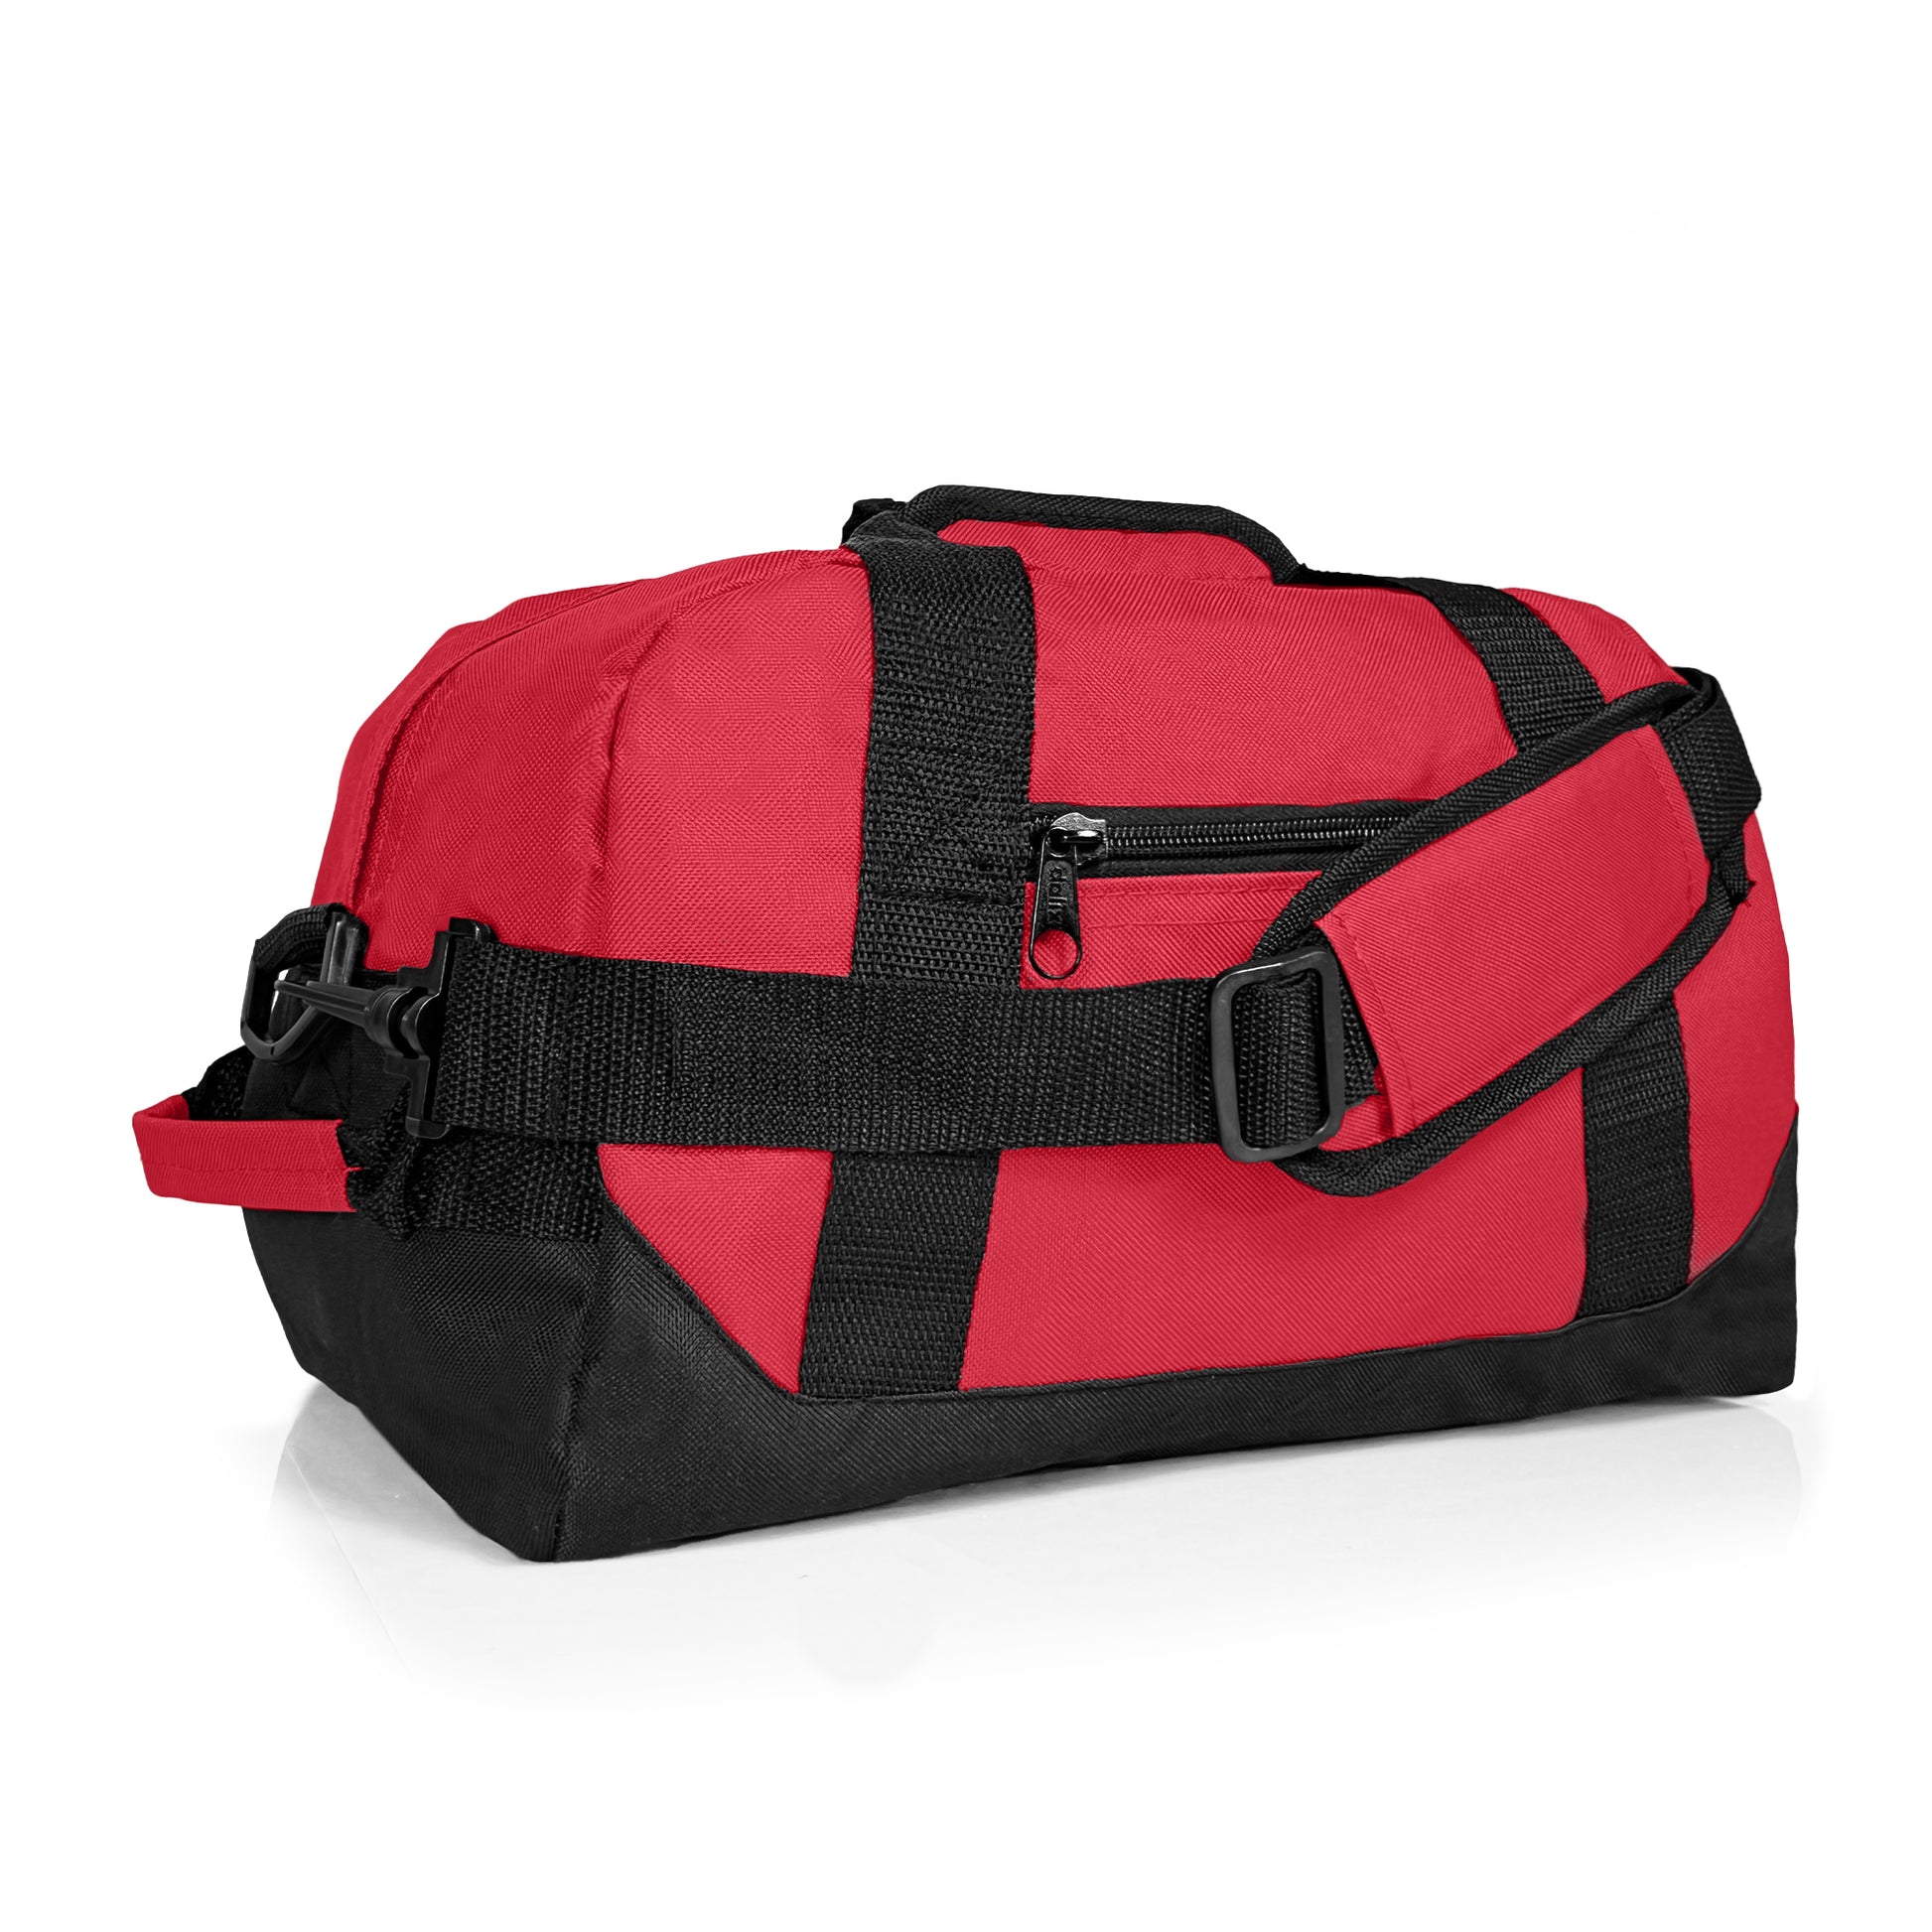 Buy Wholesale China Canvas Duffle Bag For Travel - 55l Duffle Bag